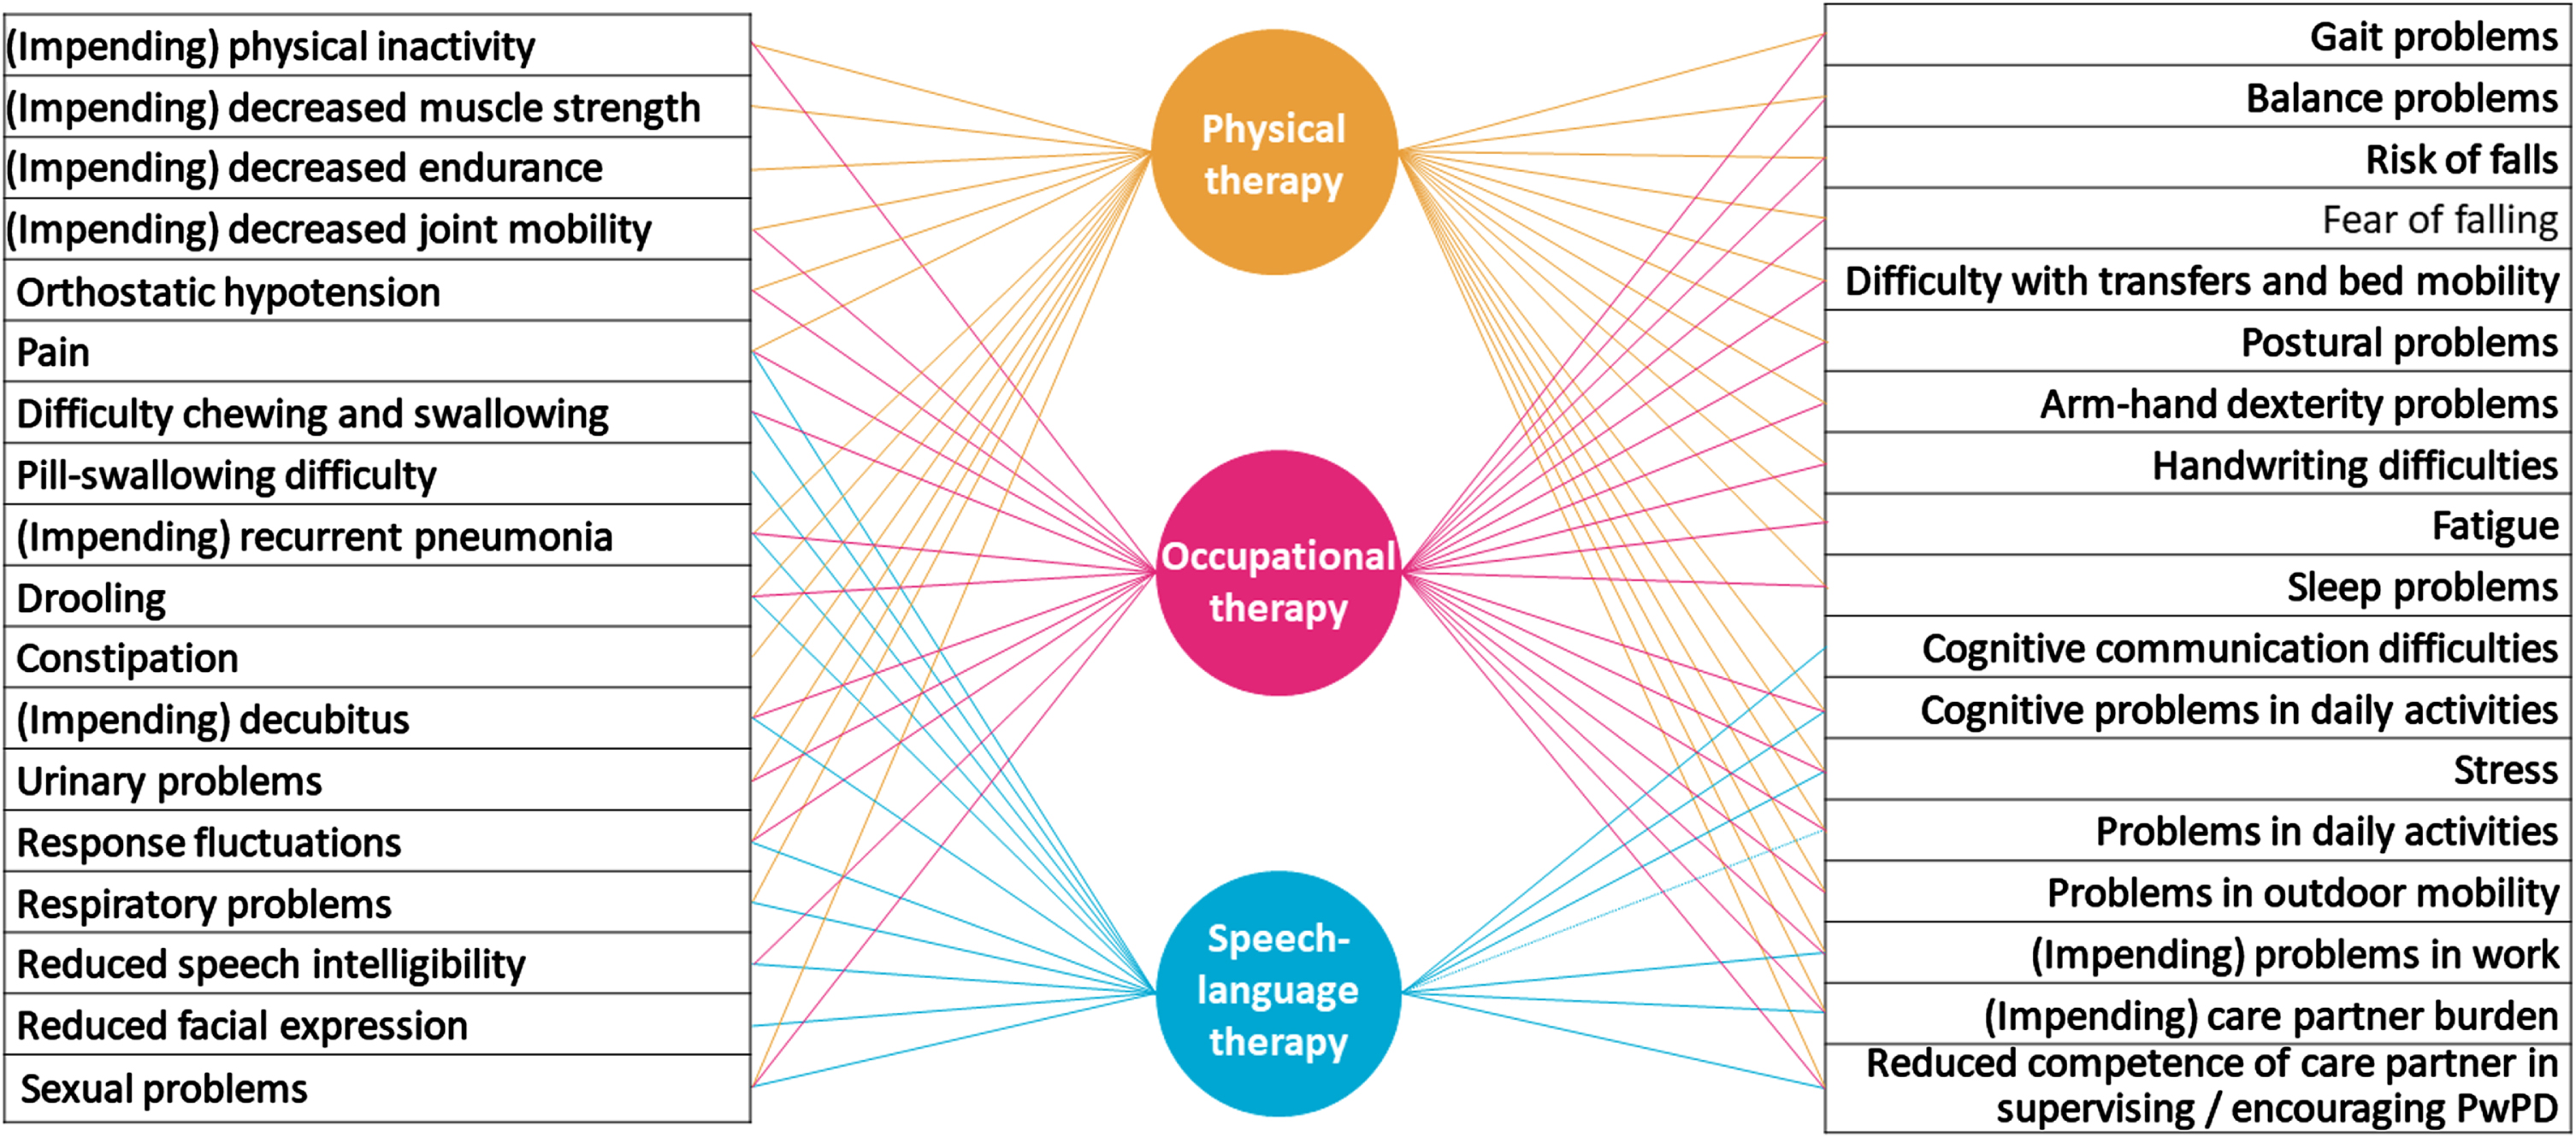 Overview of interdisciplinary overlap between specialized Allied Health Professionals for Parkinson’s disease: Possible problem areas of people with PD that are relevant to physical therapy, occupational therapy and/or speech-language therapy are listed in this figure. The lines between the problem area and the disciplines indicate which discipline may be involved (to a greater or lesser extent) in providing interventions.